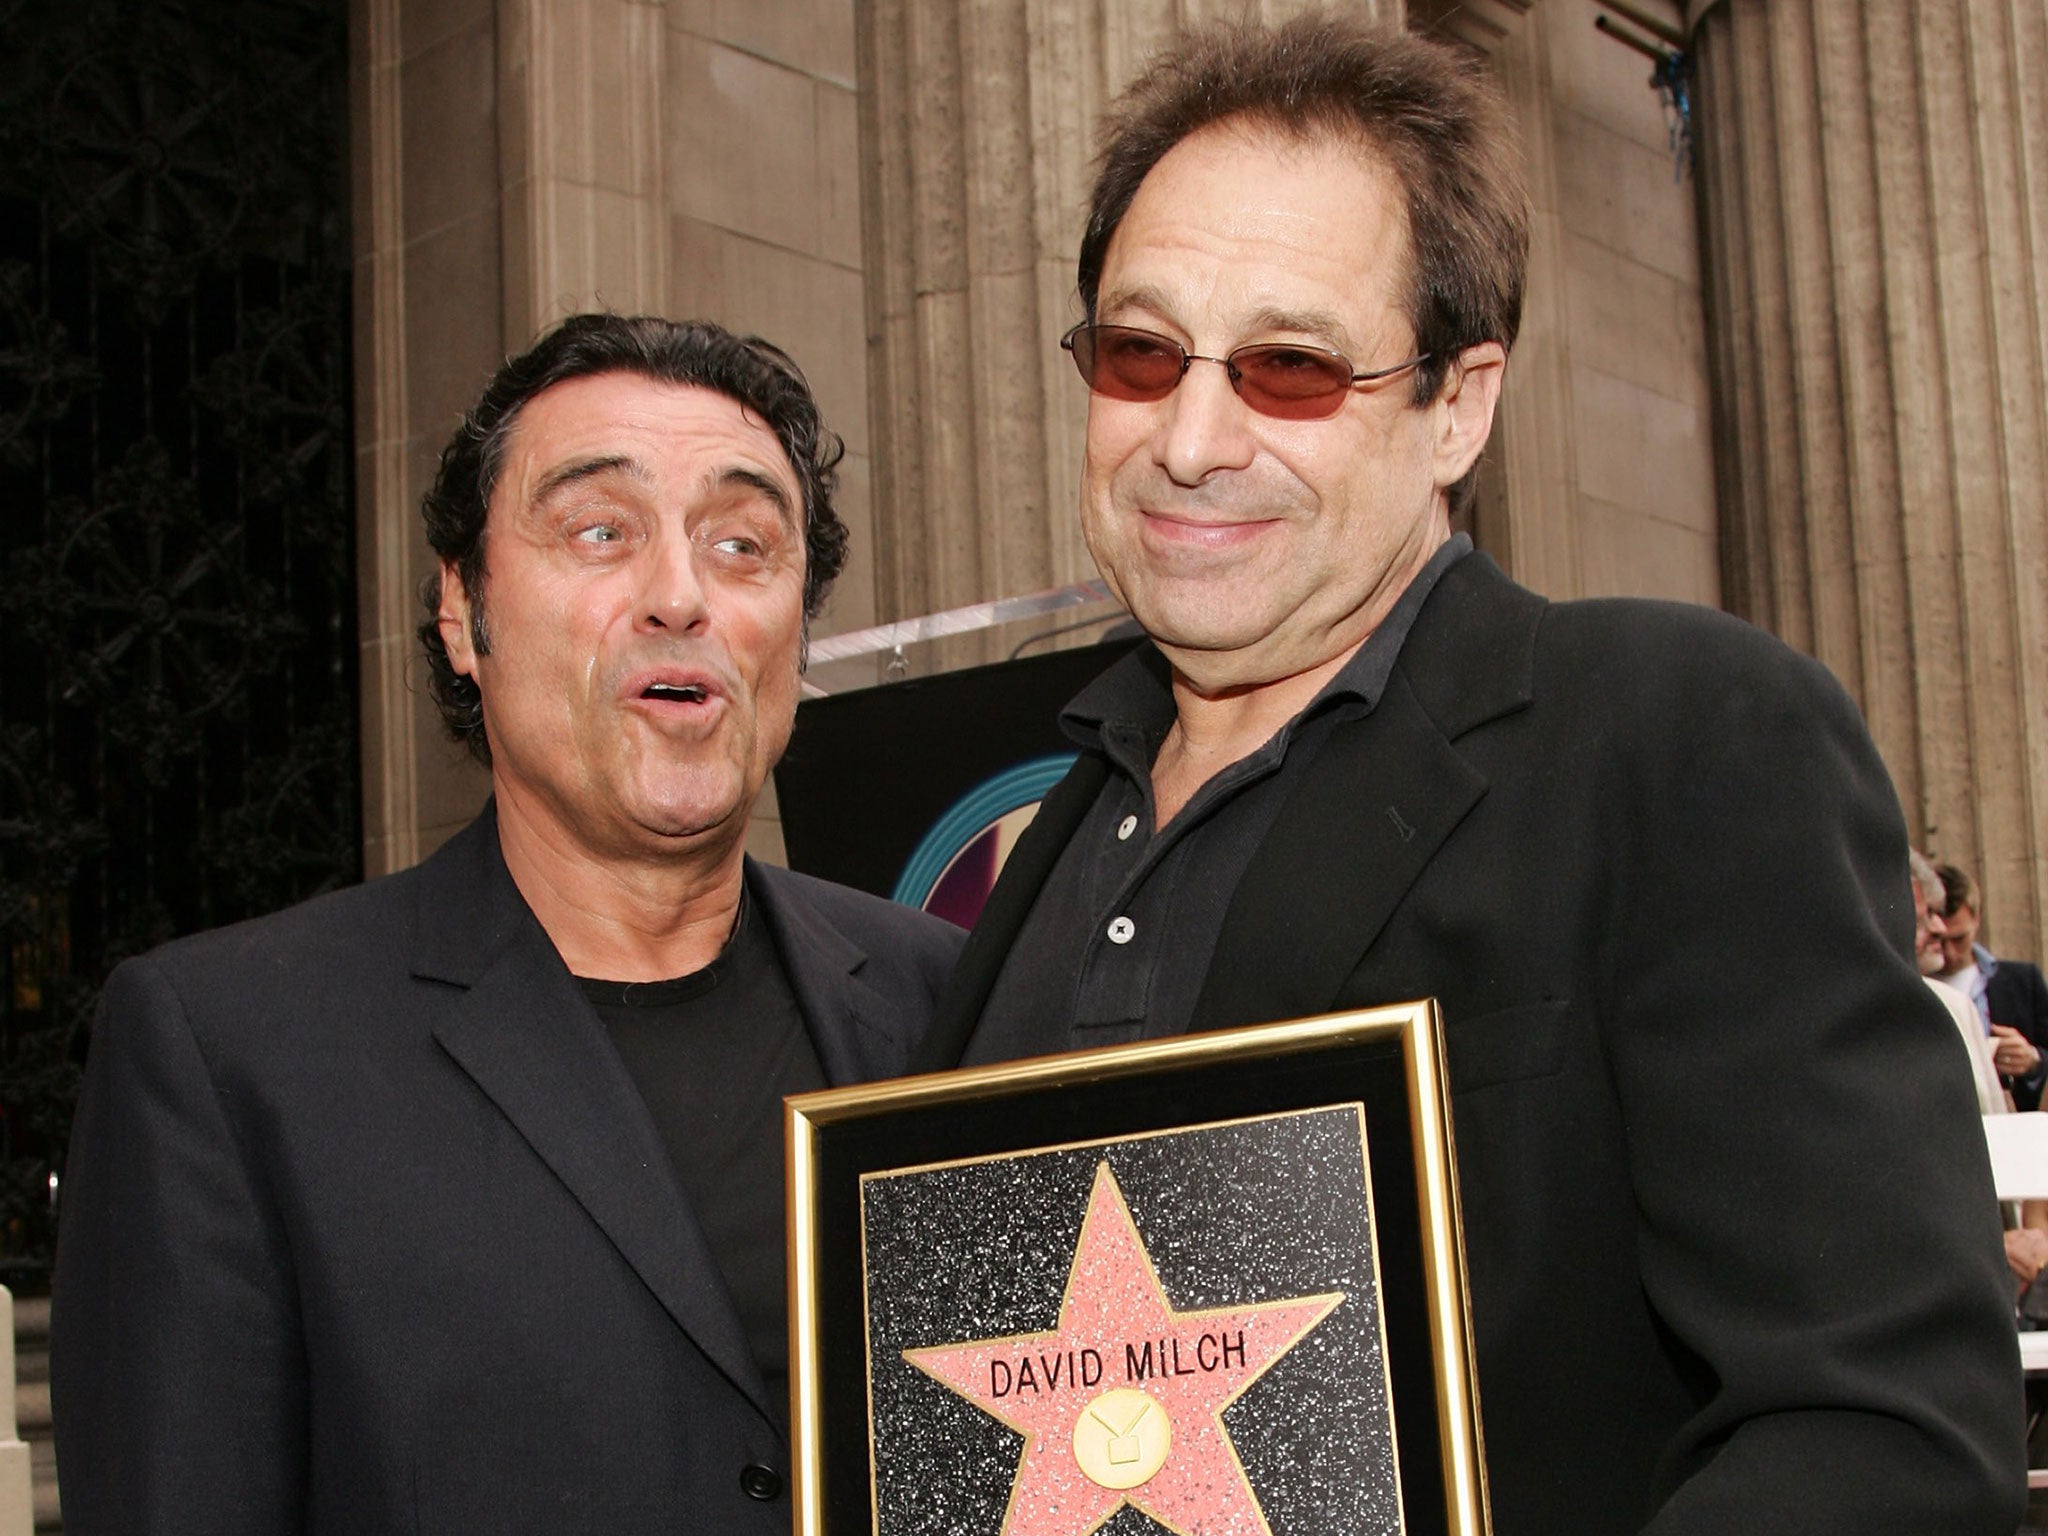 David Milch, right, with actor Ian McShane at a ceremony in 2006 honouring the television producer with a star on the Hollywood Walk of Fame